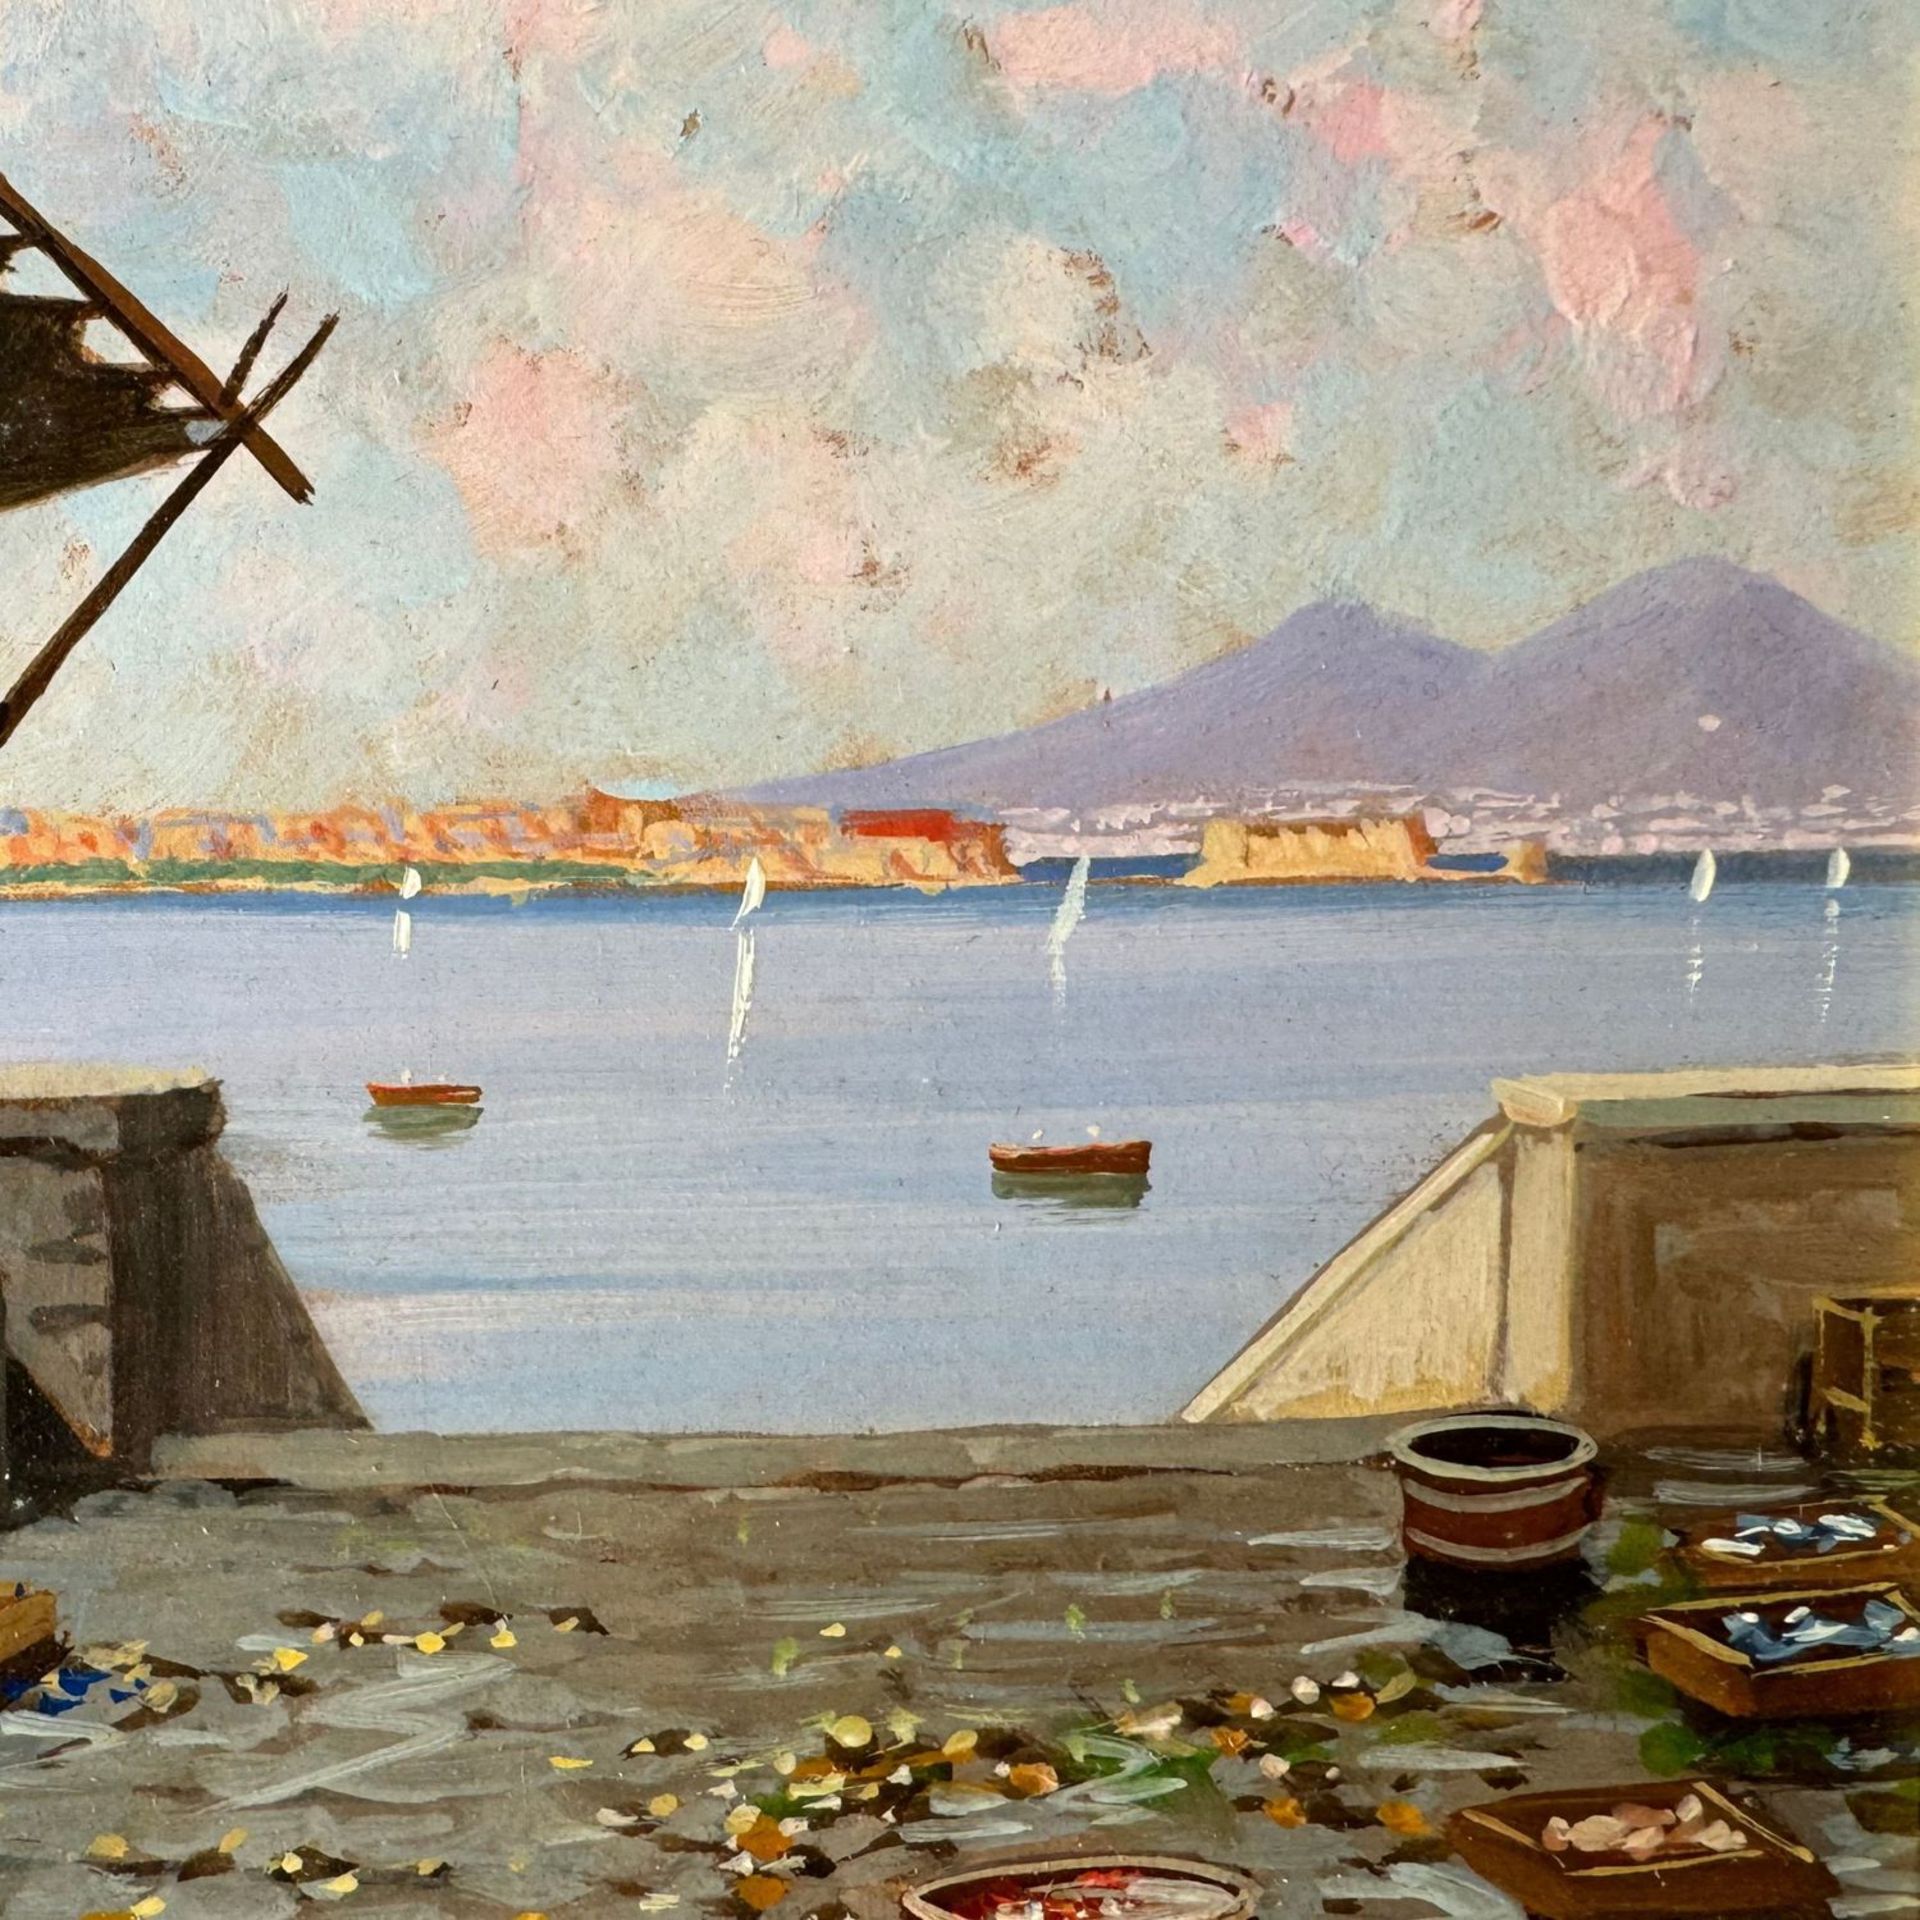 Pulcinella with a view of Naples - G. Chillemi - Image 2 of 6